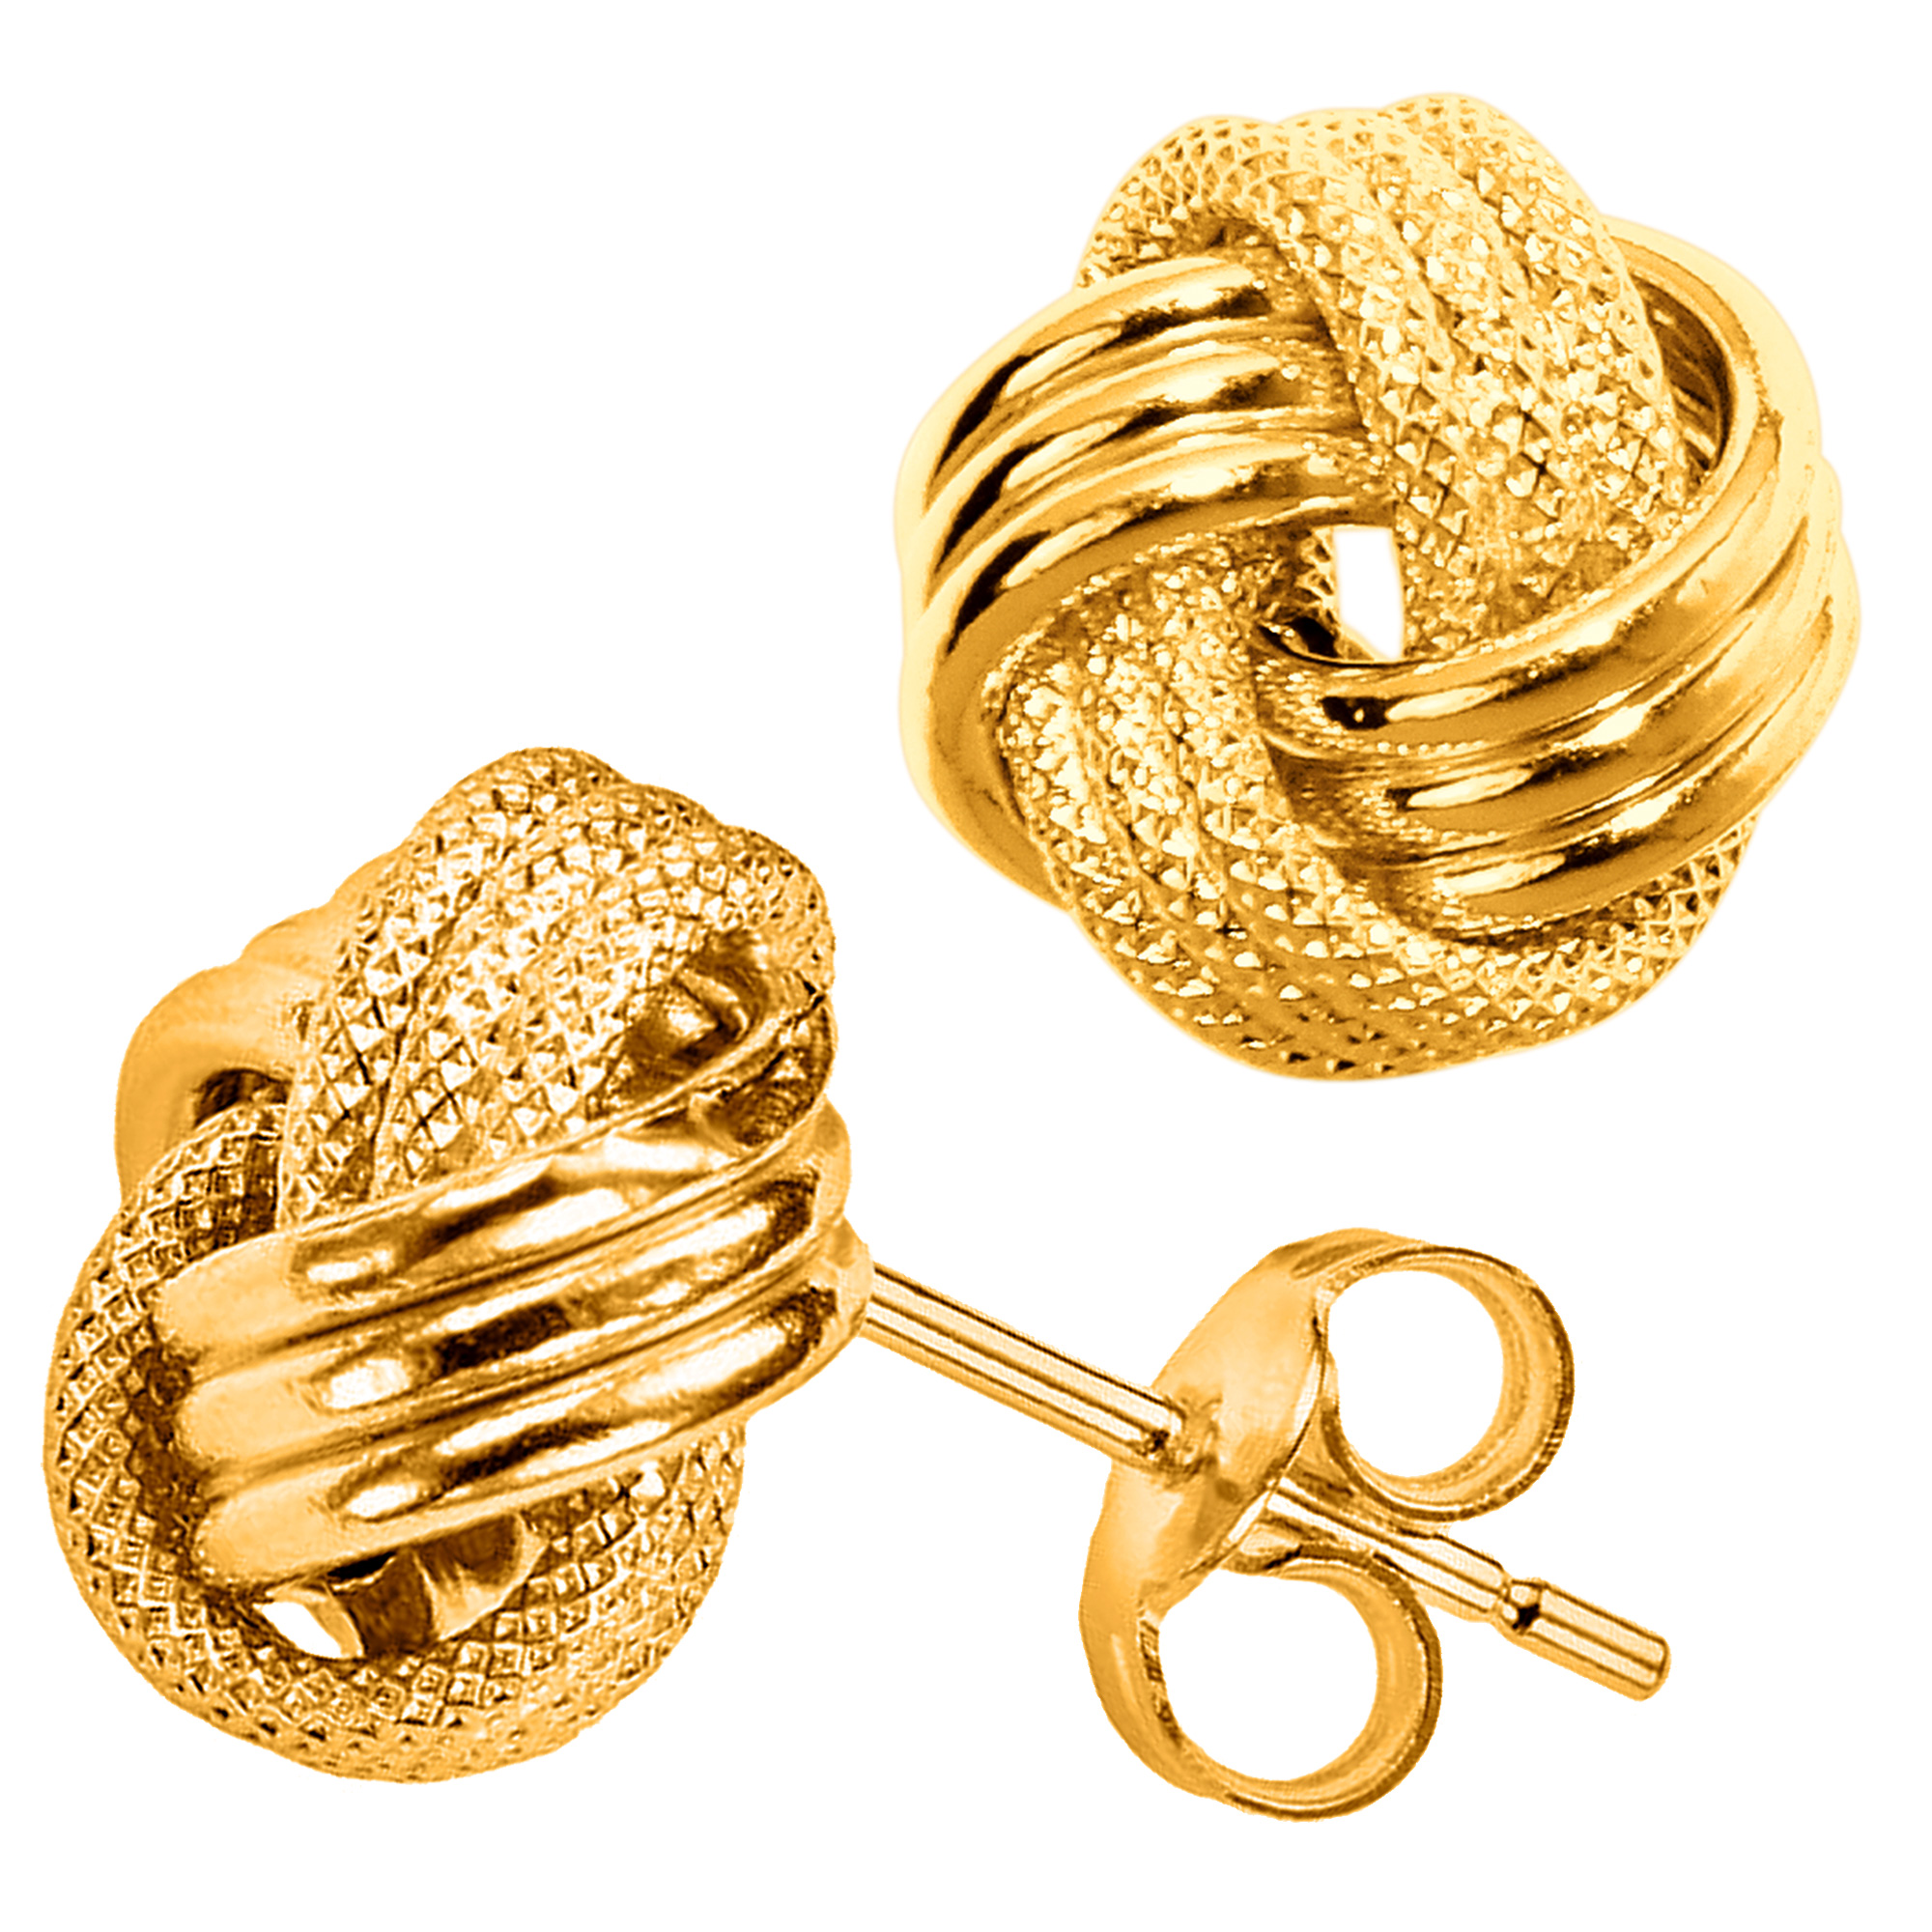 Jewelry Affairs 10k Yellow Gold Shiny And Textured Triple Love Knot Stud Earrings, 9mm